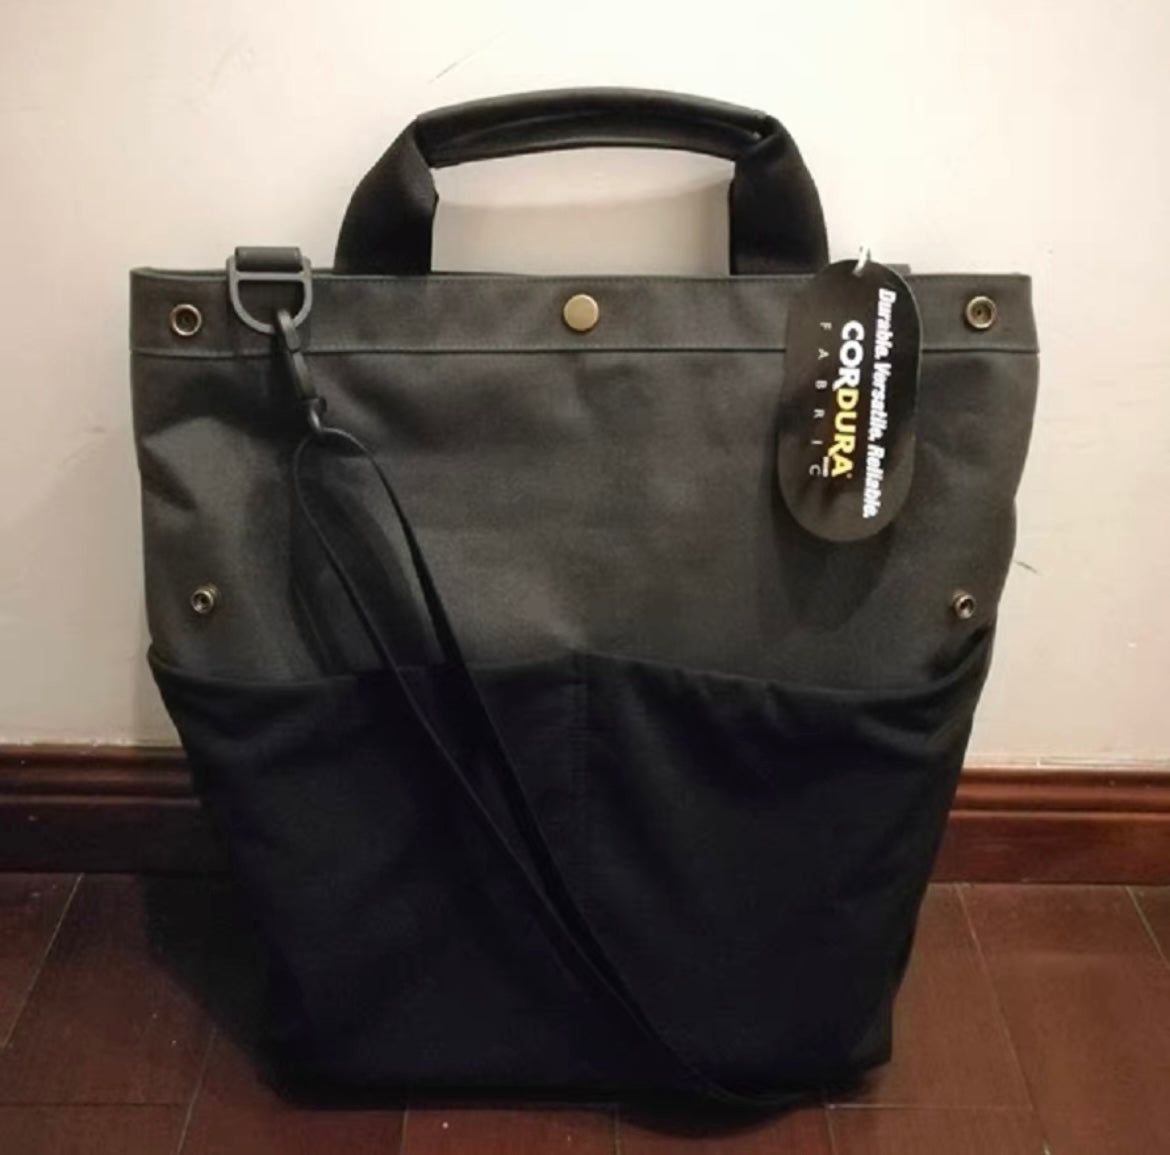 Bag from Cordura Front 9L Vintage Fabric (Black-Gray)